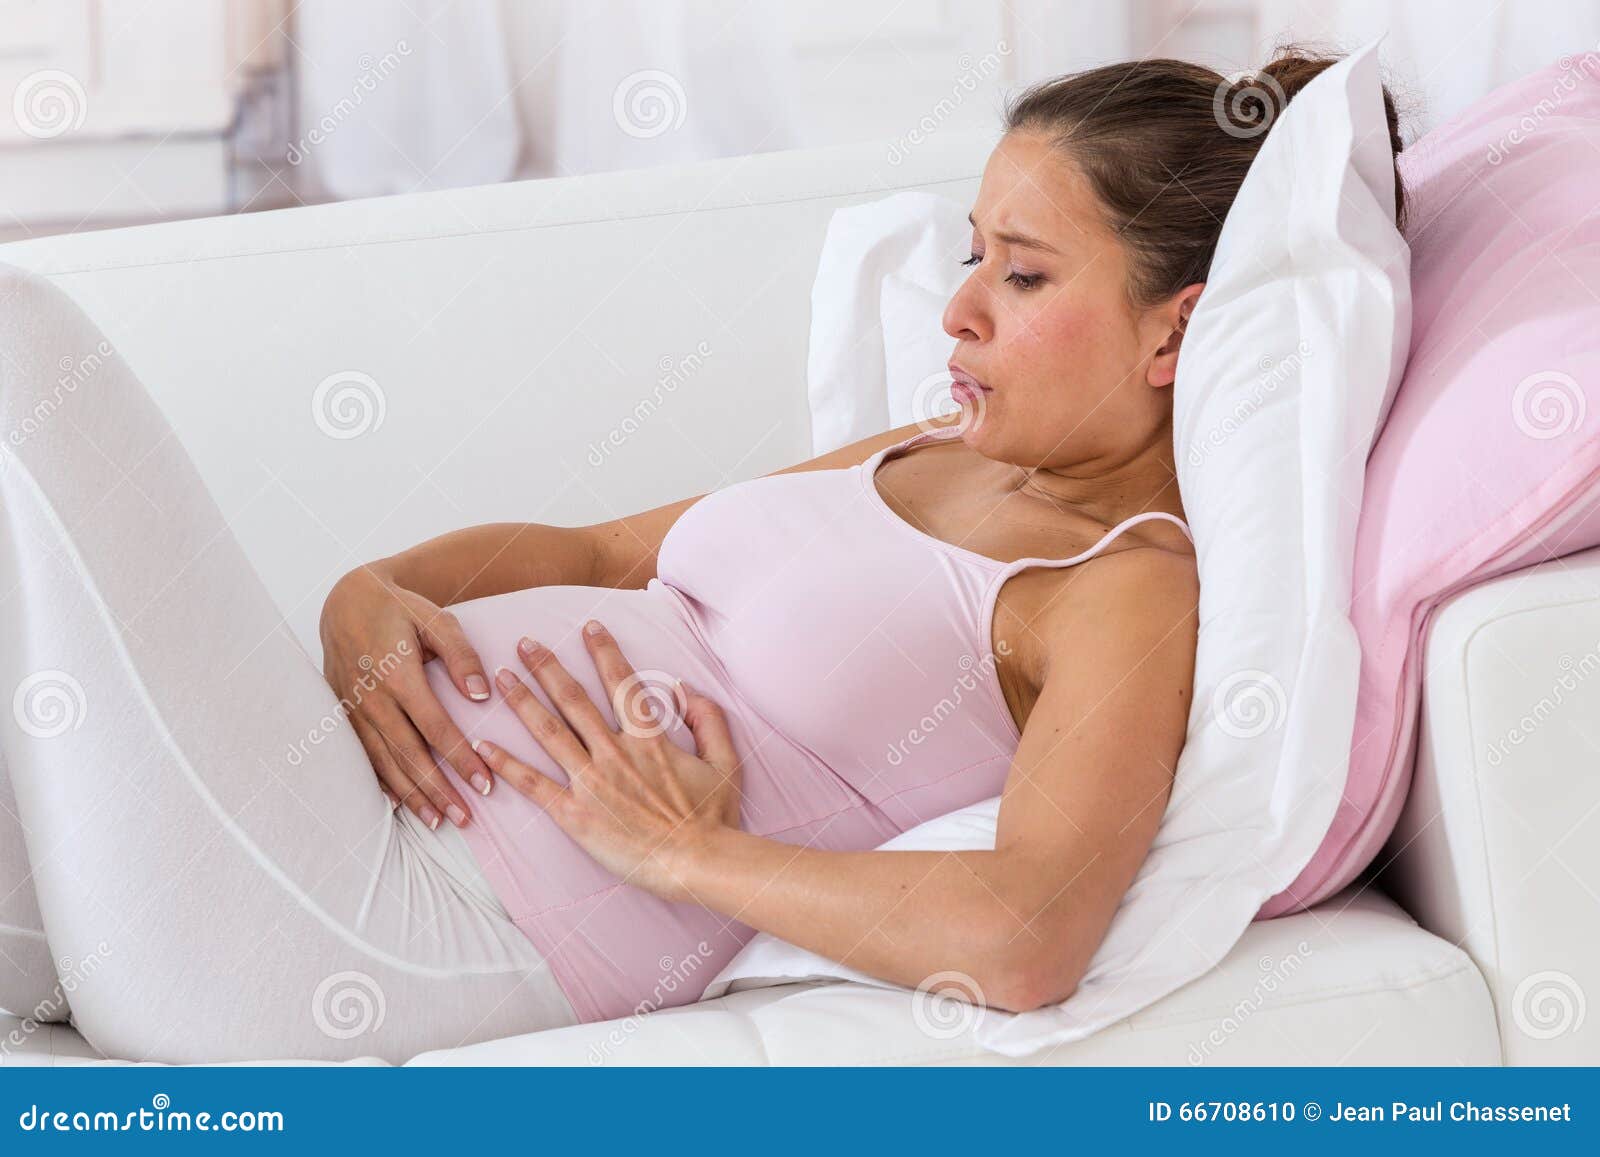 pregnant woman getting a contraction at home in the living room